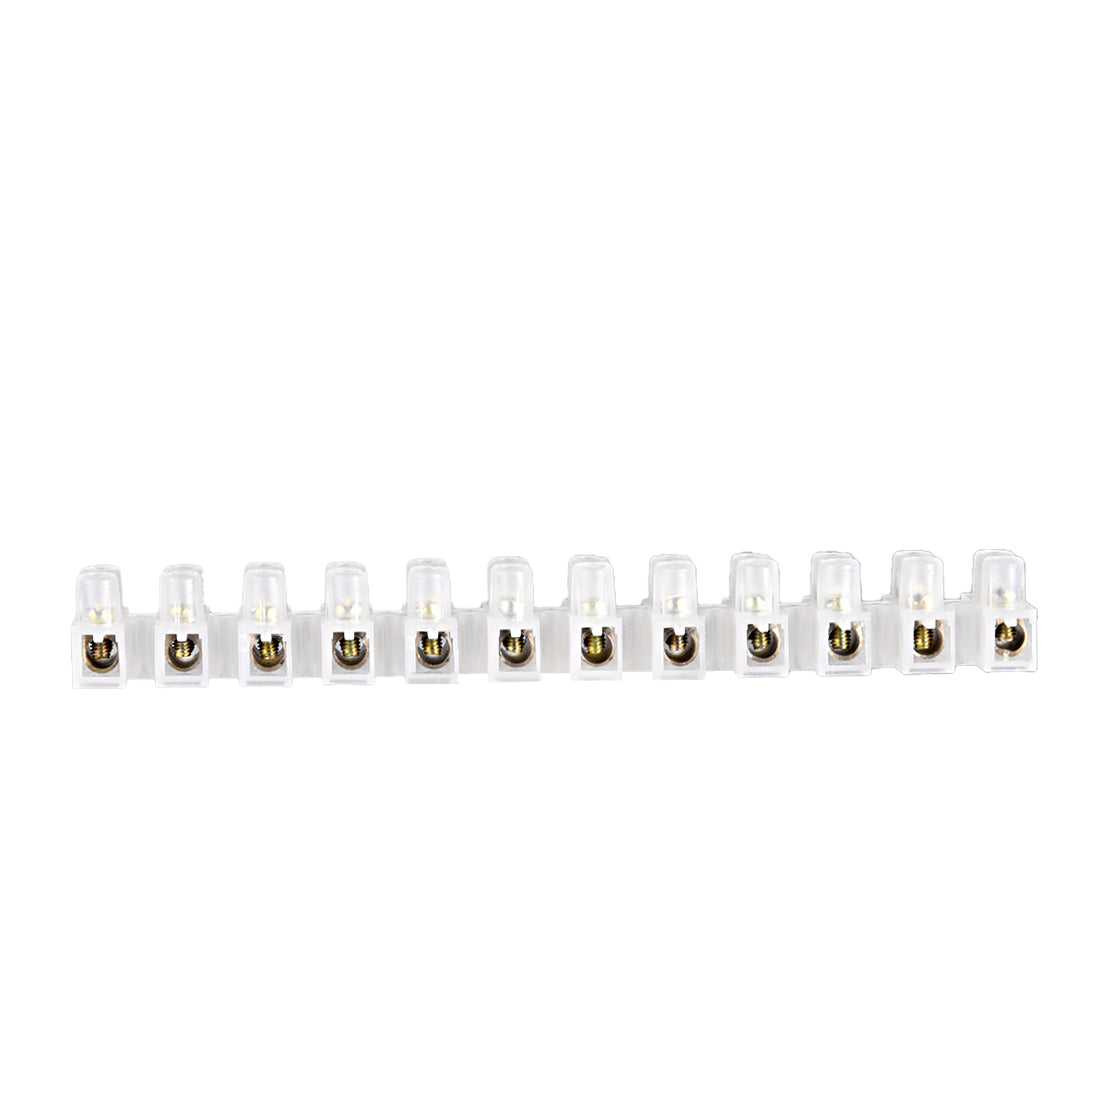 uxcell Uxcell Terminal Block , Screw Terminal Barrier Strip, 10A 12 Position Dual Row Type H Wire Connector 2pcs